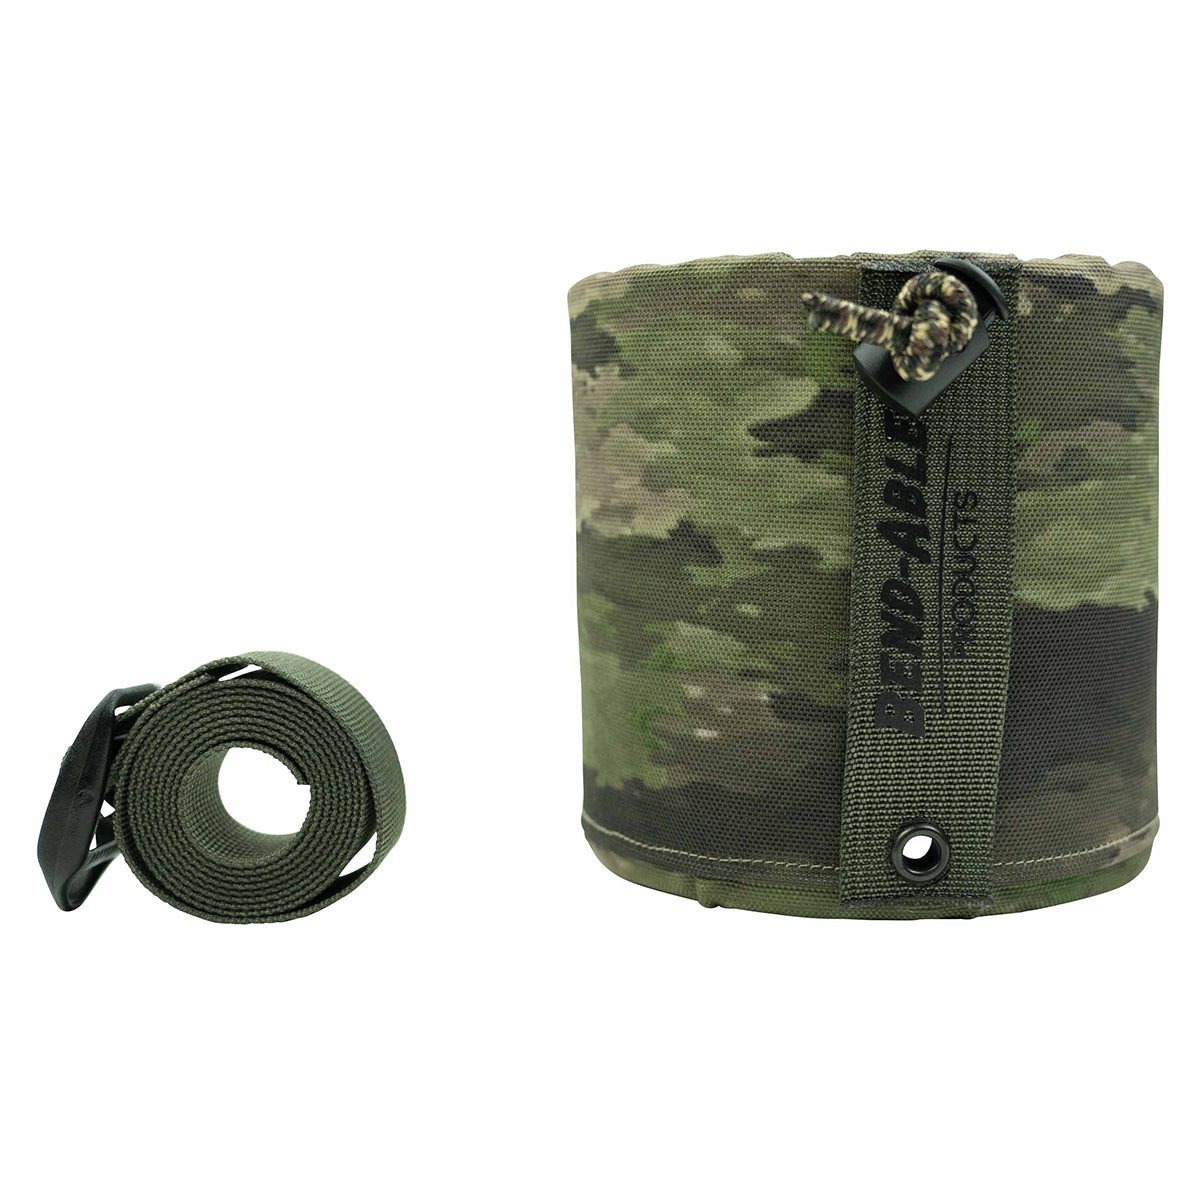 Bend-Able Bugle Tube Holder by Bend-able | Gear - goHUNT Shop